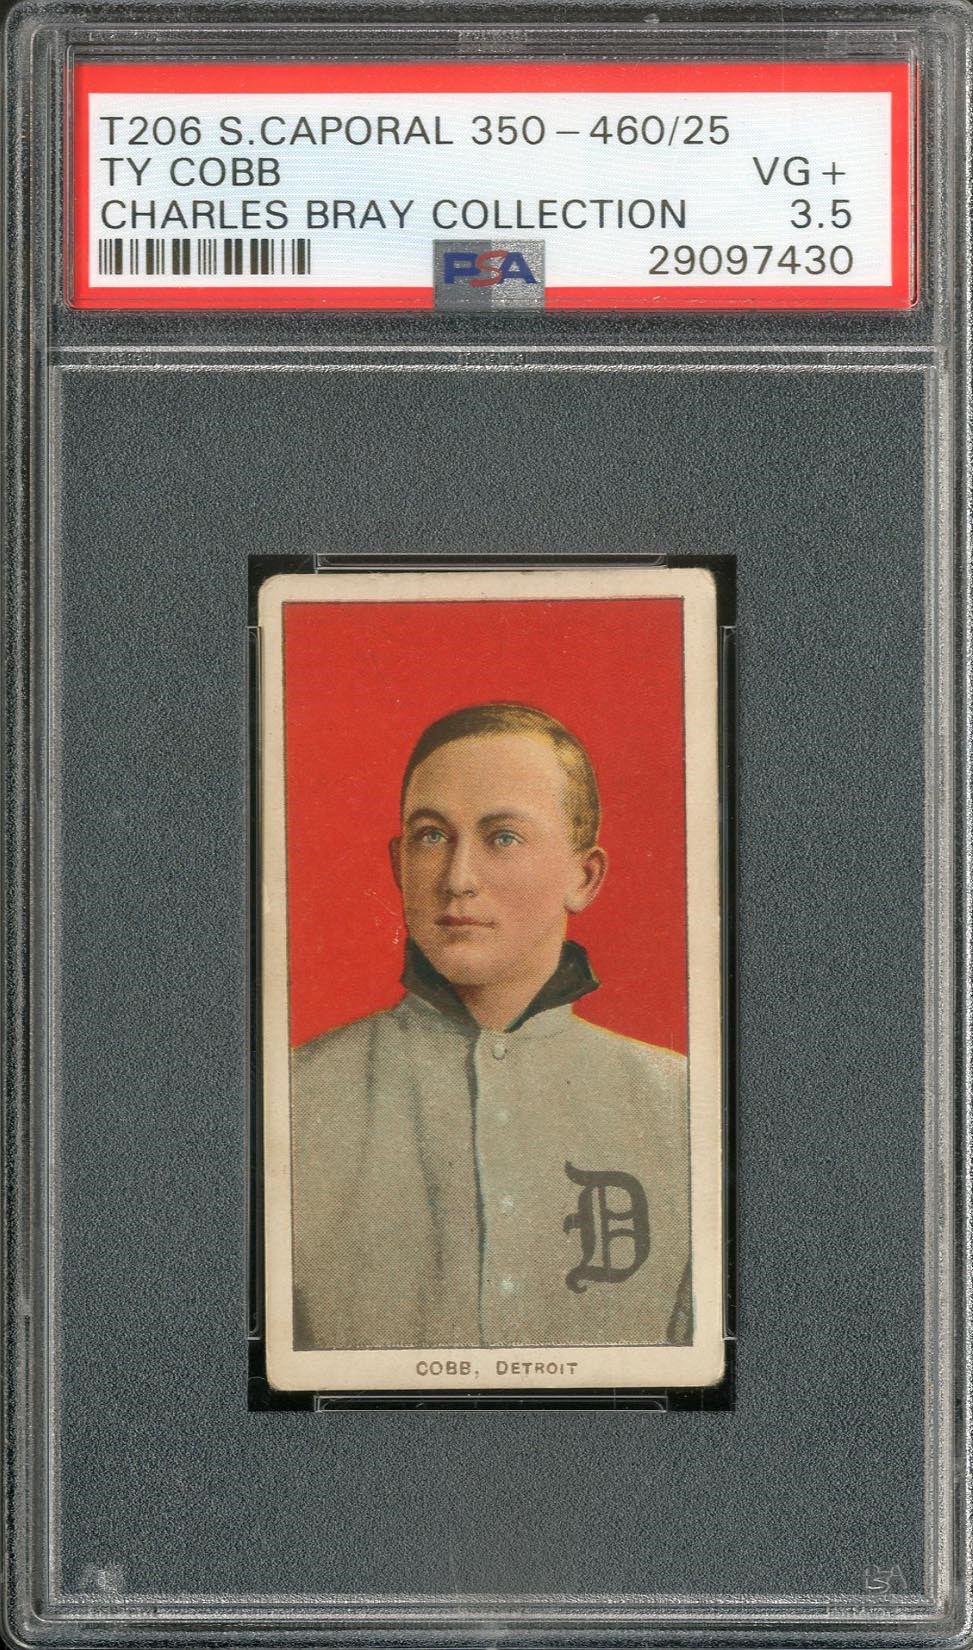 - T206 Ty Cobb Red Portrait PSA VG+ 3.5 with Tougher Reverse - The Charles Bray Collection